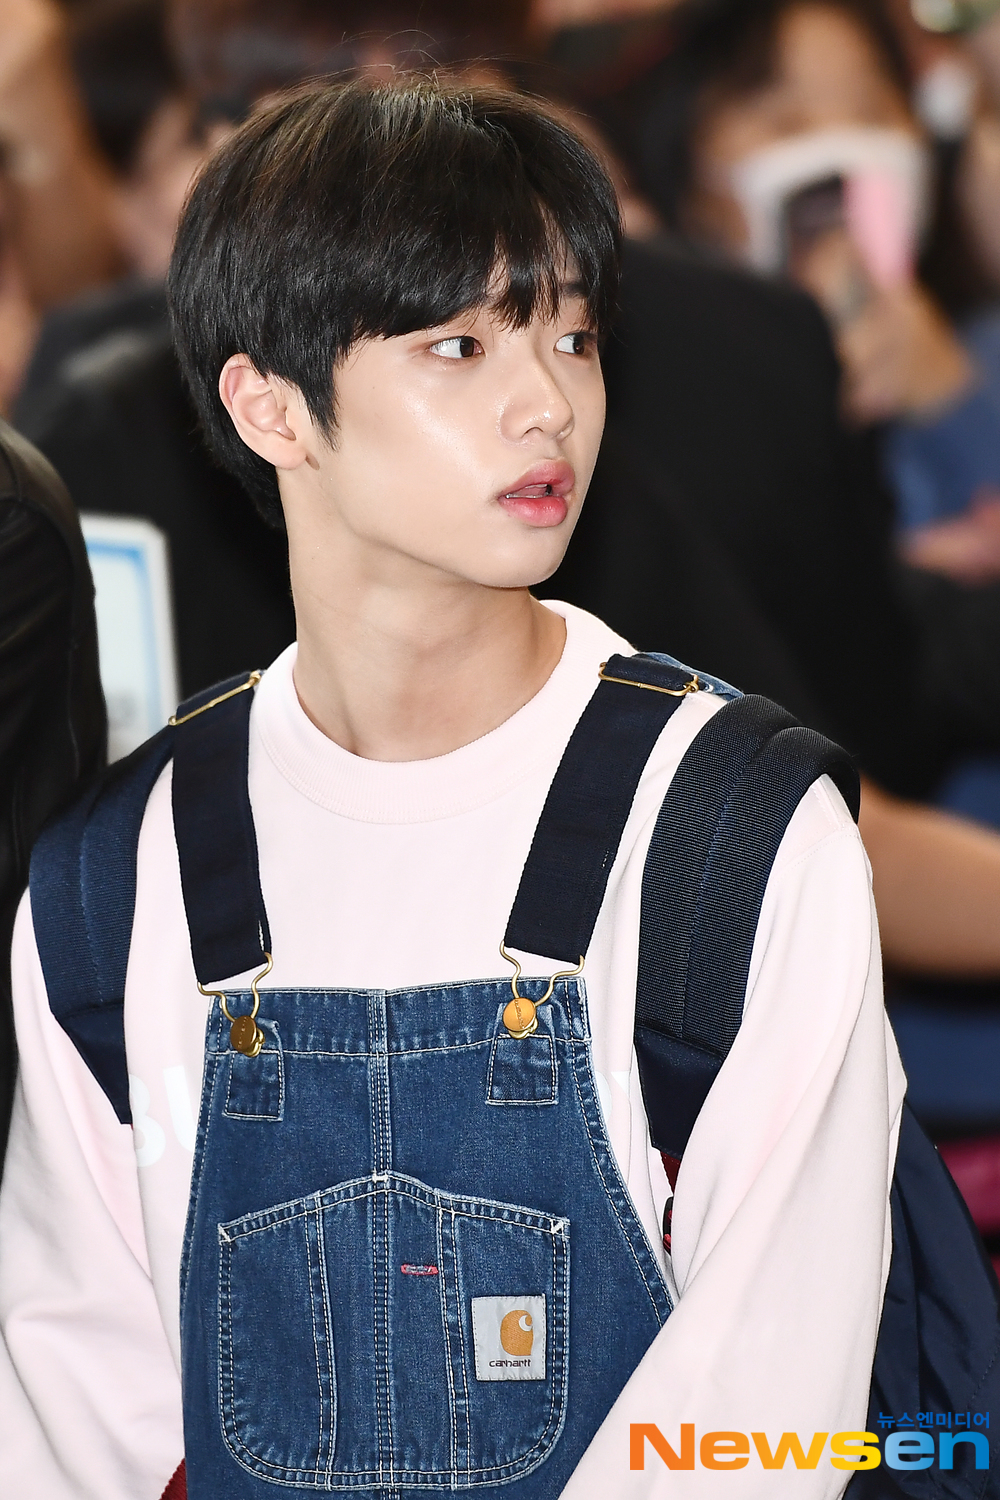 Son Dong-pyo, a former project group X1, celebrated his 19th birthday.Son Dong-pyo was born on September 9, 2002 in Snow crab, North Gyeongsang Province.East East, Big Tube tickets.Son Dong-pyo, who means who is the main character everywhere, appeared on Mnet Produce X101 which was broadcast last year after living as a DSP media trainee and made his debut as a project boy group X1 with the final 6th place and 11 people list.Son Dong-pyo, who has a lot of talent and dance skills to win the first prize in the evaluation at the end of the month in a week after joining his agency, is loved by fans with his thick lips, fairy-like expressions, fresh visuals and charm.Son Dong-pyo, who dreams of a singer-songwriter who can write, write, and produce.I want to make a R&B ballad for Son Dong-pyo, he said, and Ive been healing and comforting while listening to songs, and I think Id be really happy if my song could give such comfort to my fans.Lets take a picture of the charm of Passion Rich Son Dong-pyo, who went to dance academy for 5 hours from his hometown Snow crab to Daegu from the third grade of junior high school where he started dreaming of singer.Jung Yoo-jin